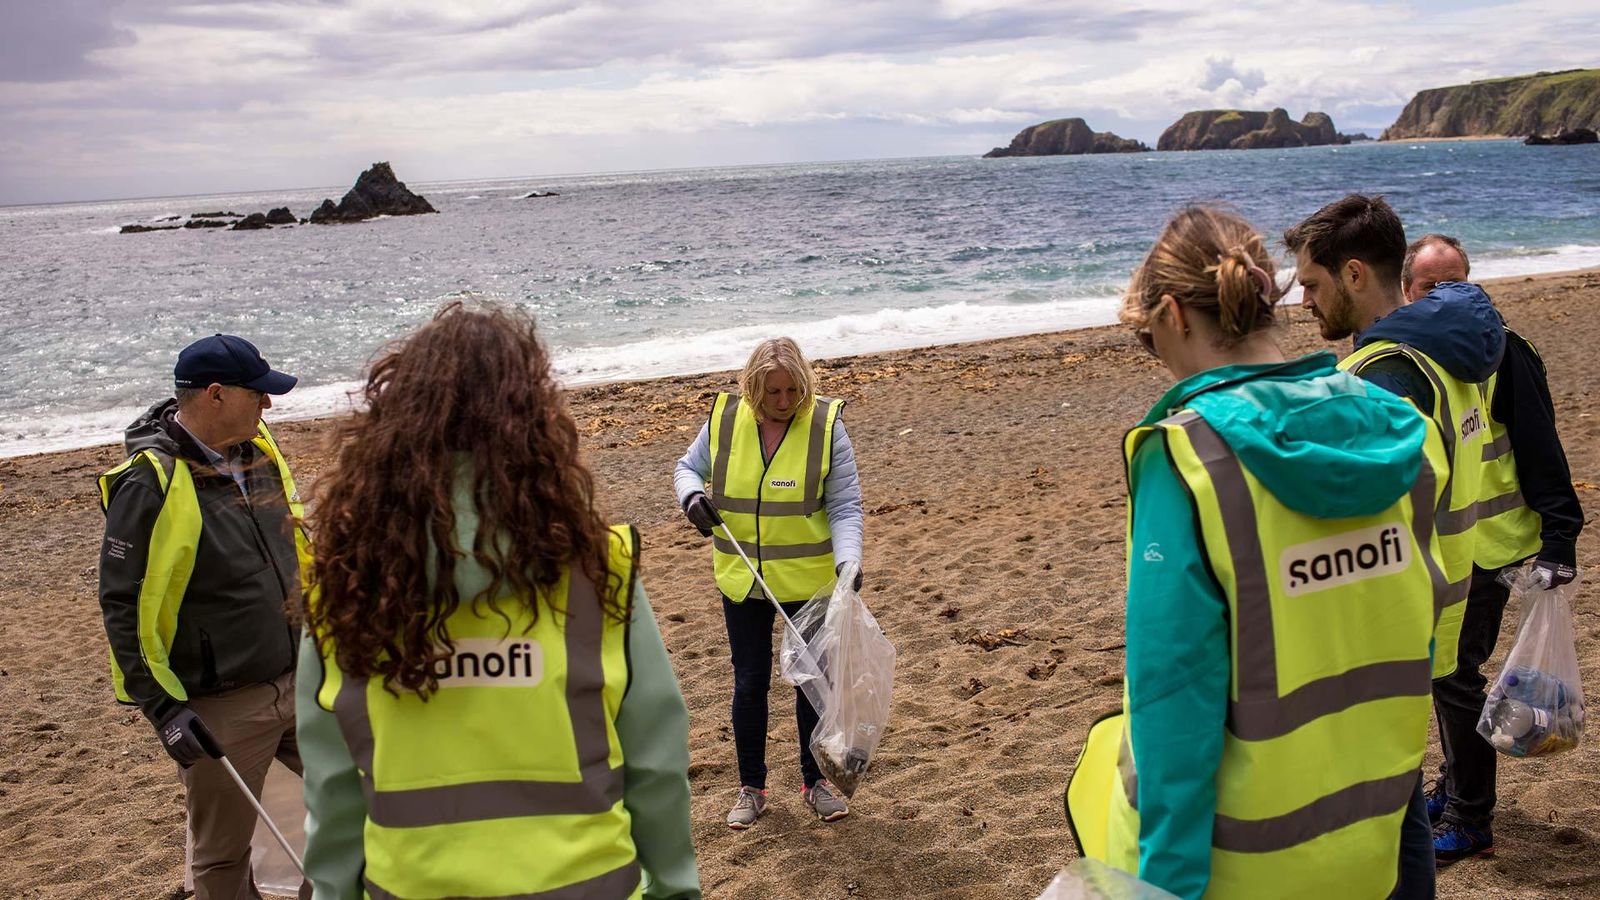 A clean-up operation on Garrarus beach by Sanofi employees, Waterford - Ireland L- R : James Cullen, Heath & Safety Leader, Jennifer Murphy Health Safety & Environment Specialist, Diane Pitard, project manager Planet Care, Sinead Keane Health Safety & Environment Specialist , Julien Lussagnet Communication MSAT